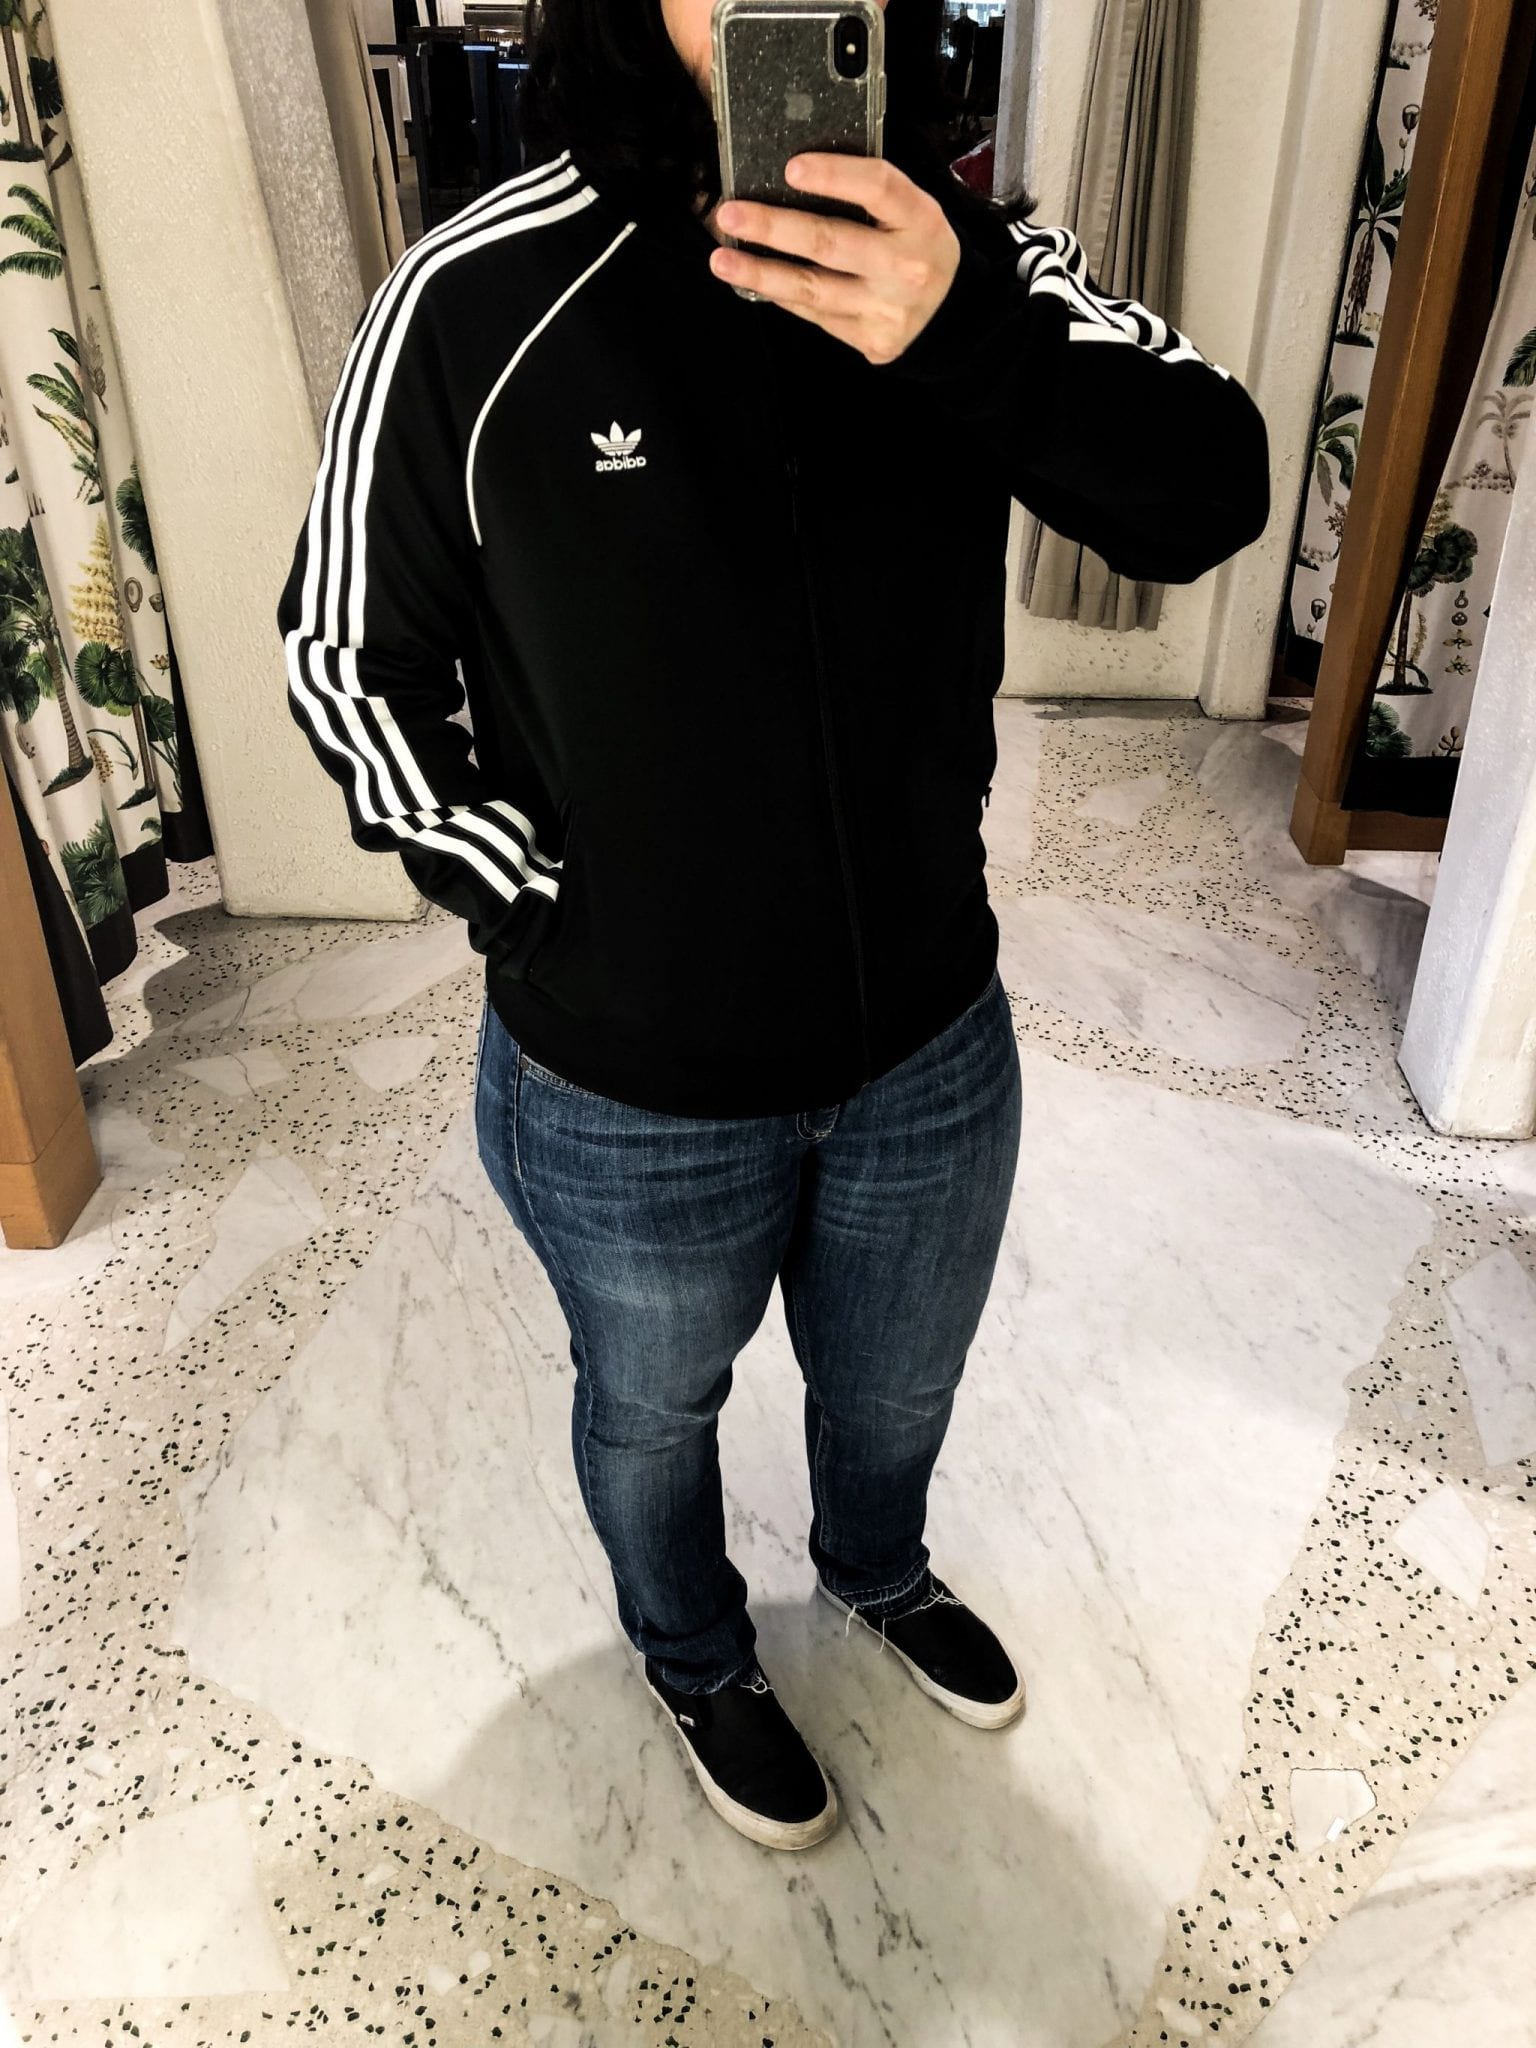 Fit Review: Adidas SST Track Jacket and Levi's Fit Jeans - The Sweat Edit